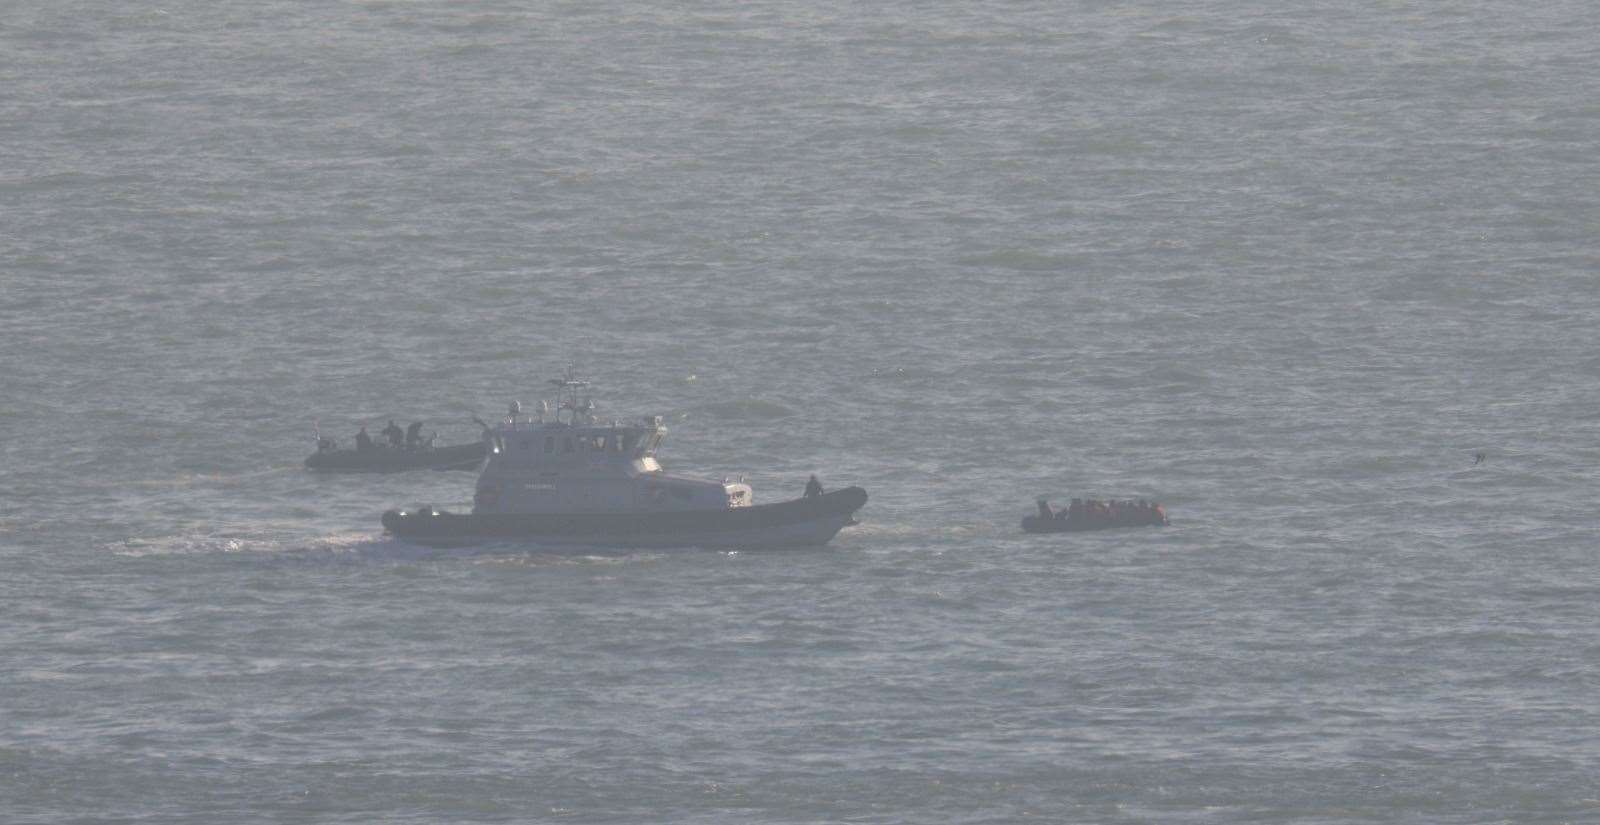 A dinghy with a Border Force vessel to aid it.The craft on the left is thought ot be a Border Force RHIB. Picture: UKNIP